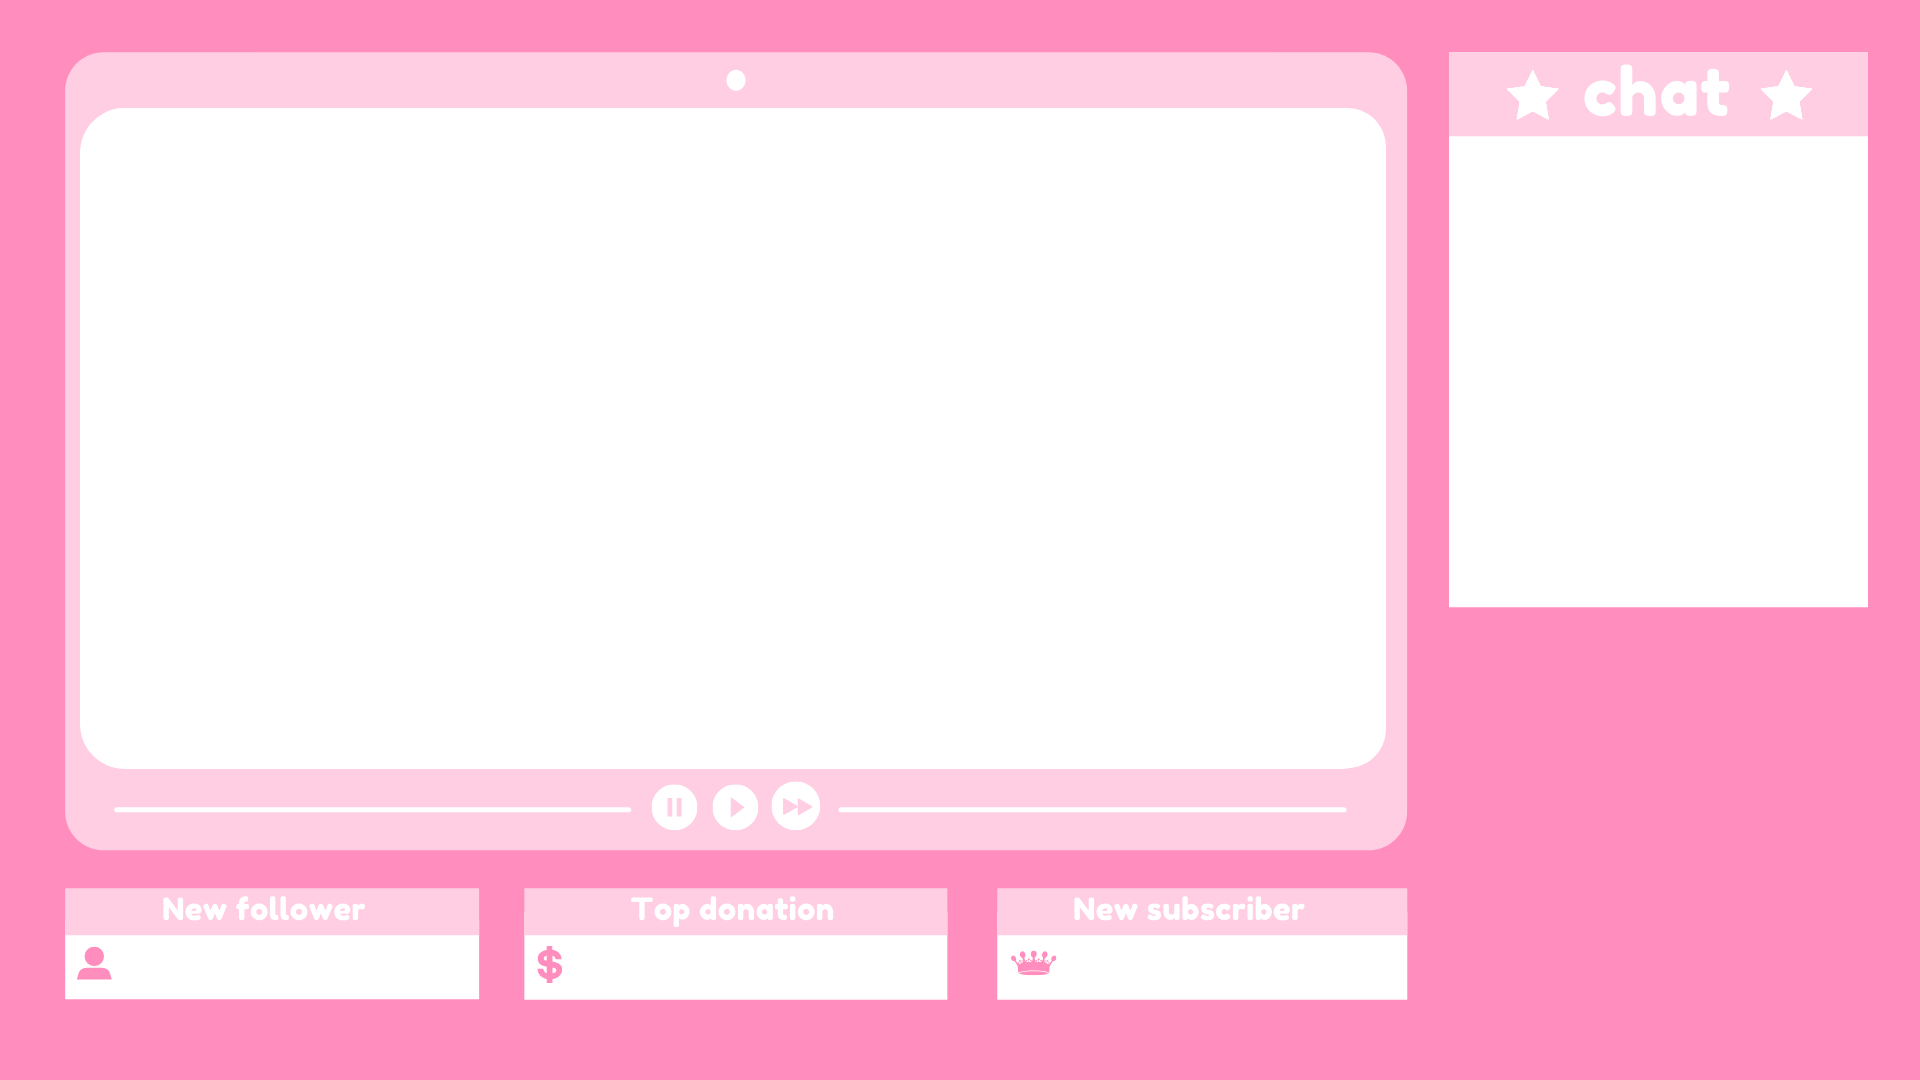 PREMADE OVERLAY] 🌸 Spring Just Chatting & Game Screen Overlay - Ciarra  Chii's Ko-fi Shop - Ko-fi ❤️ Where creators get support from fans through  donations, memberships, shop sales and more! The